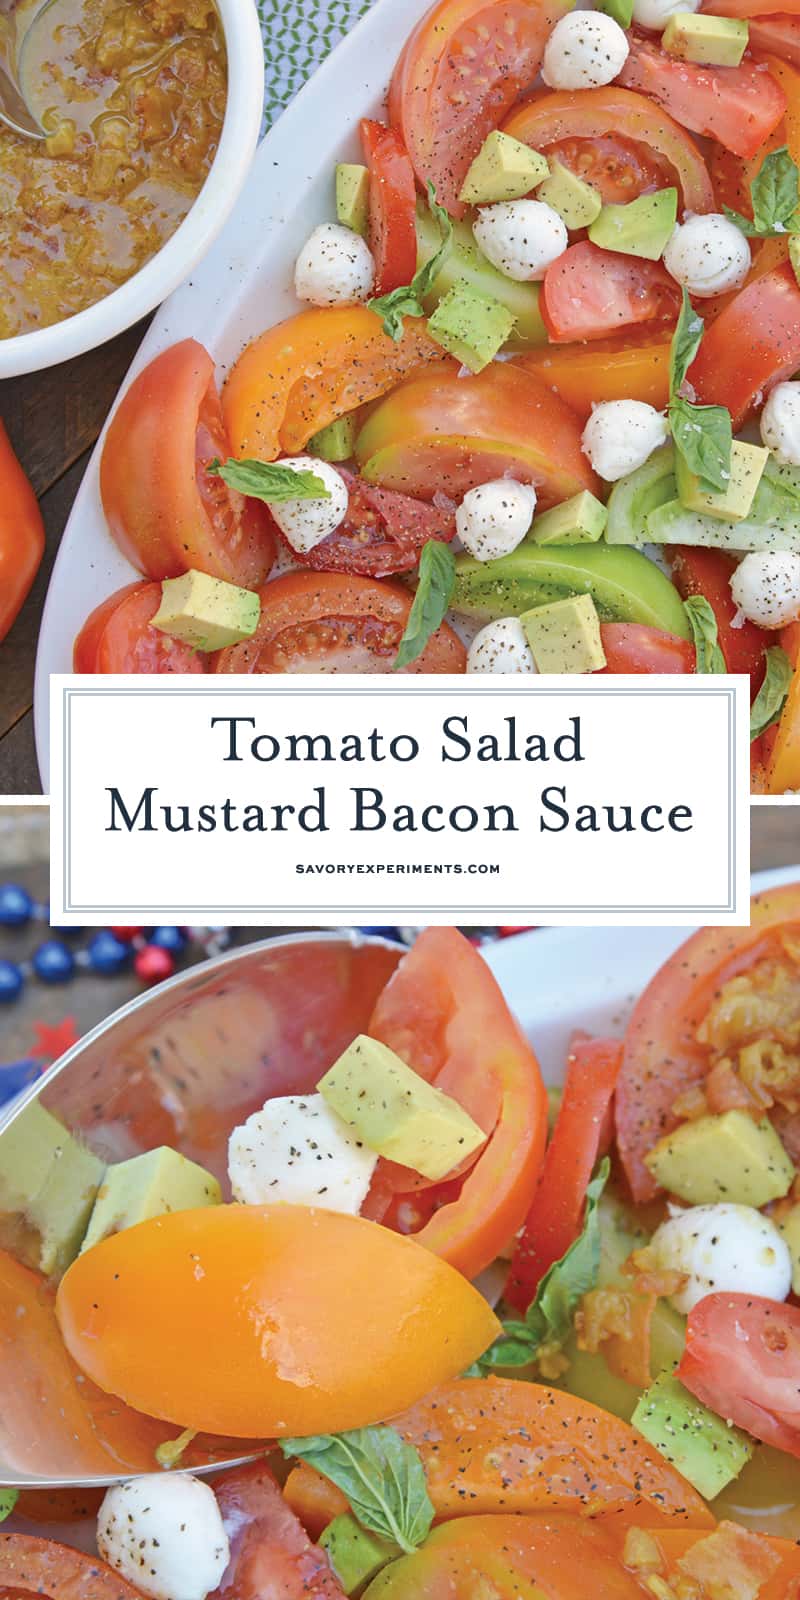 Tomato Salad with Mustard Bacon Dressing is the ultimate summer side dish using lush tomatoes, avocado mozzarella & basil. Make it ahead for any party or BBQ. #tomatosalad #tomatorecipes www.savoryexperiments.com 